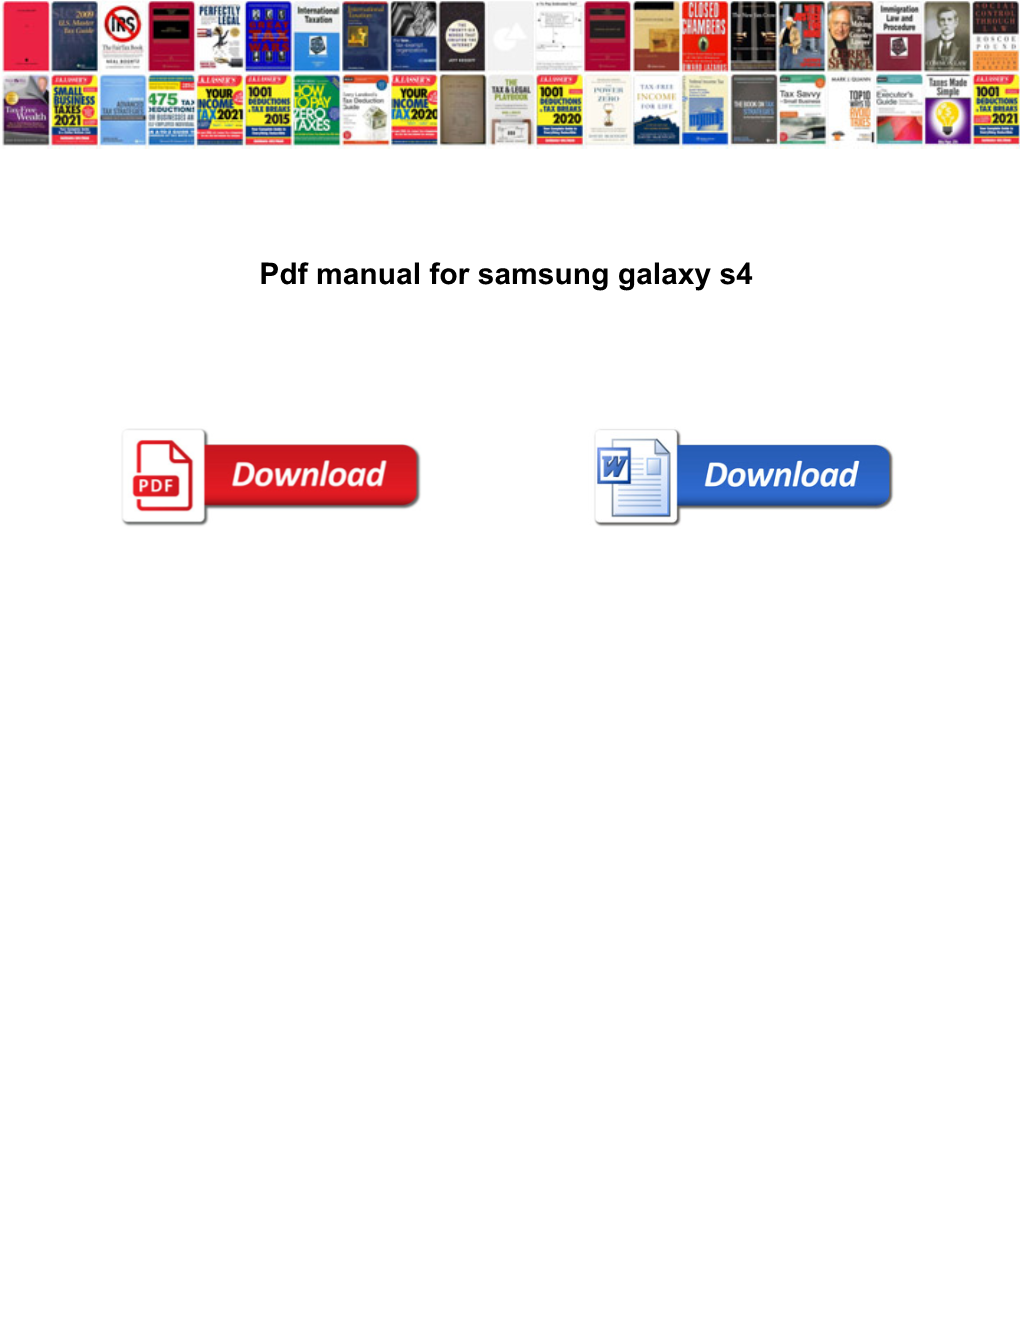 Pdf Manual for Samsung Galaxy S4 Pdf Manual for Samsung Galaxy S4 for the Same Reason As the First Video